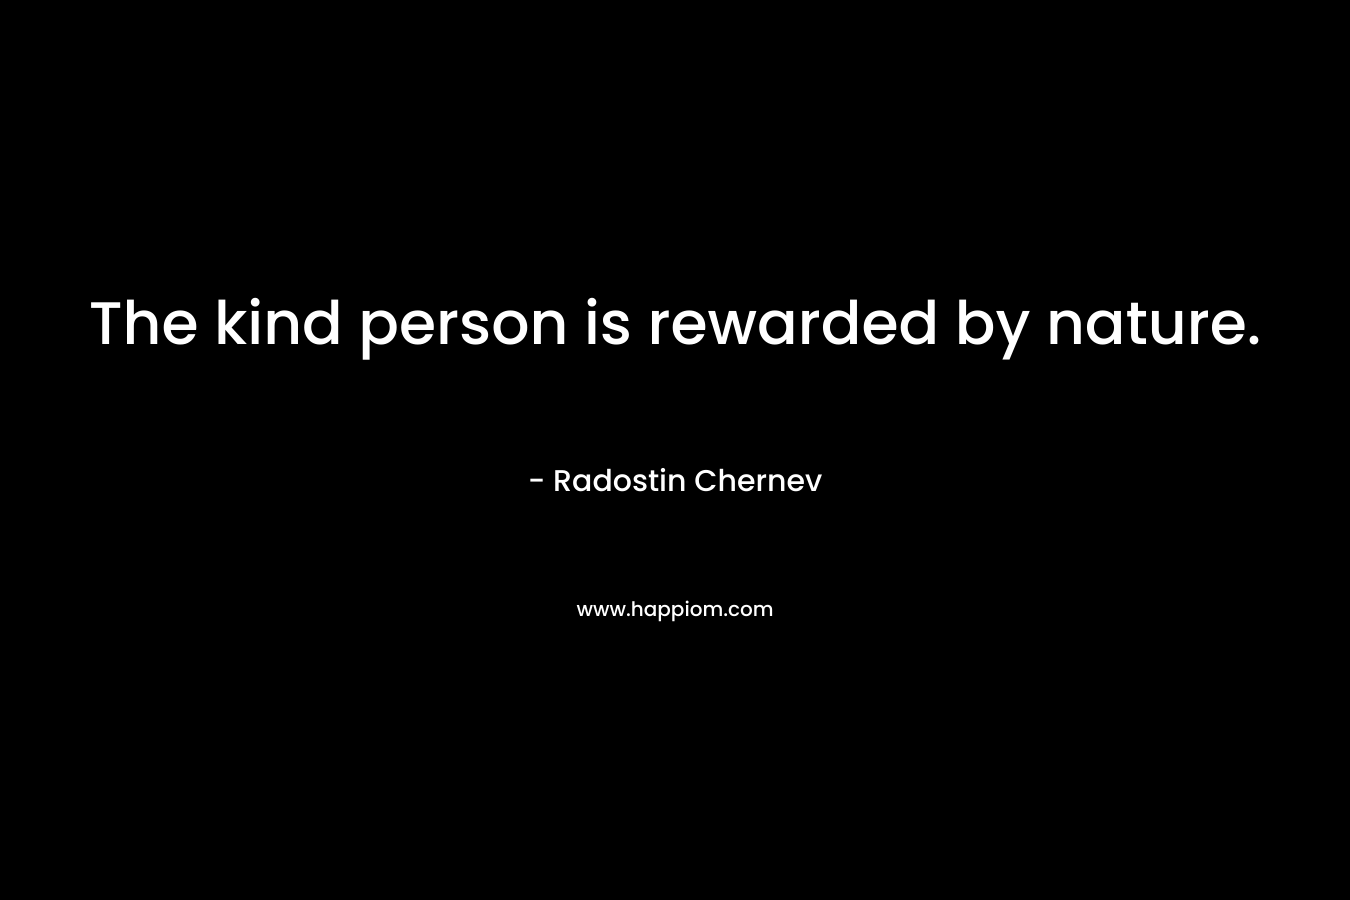 The kind person is rewarded by nature.